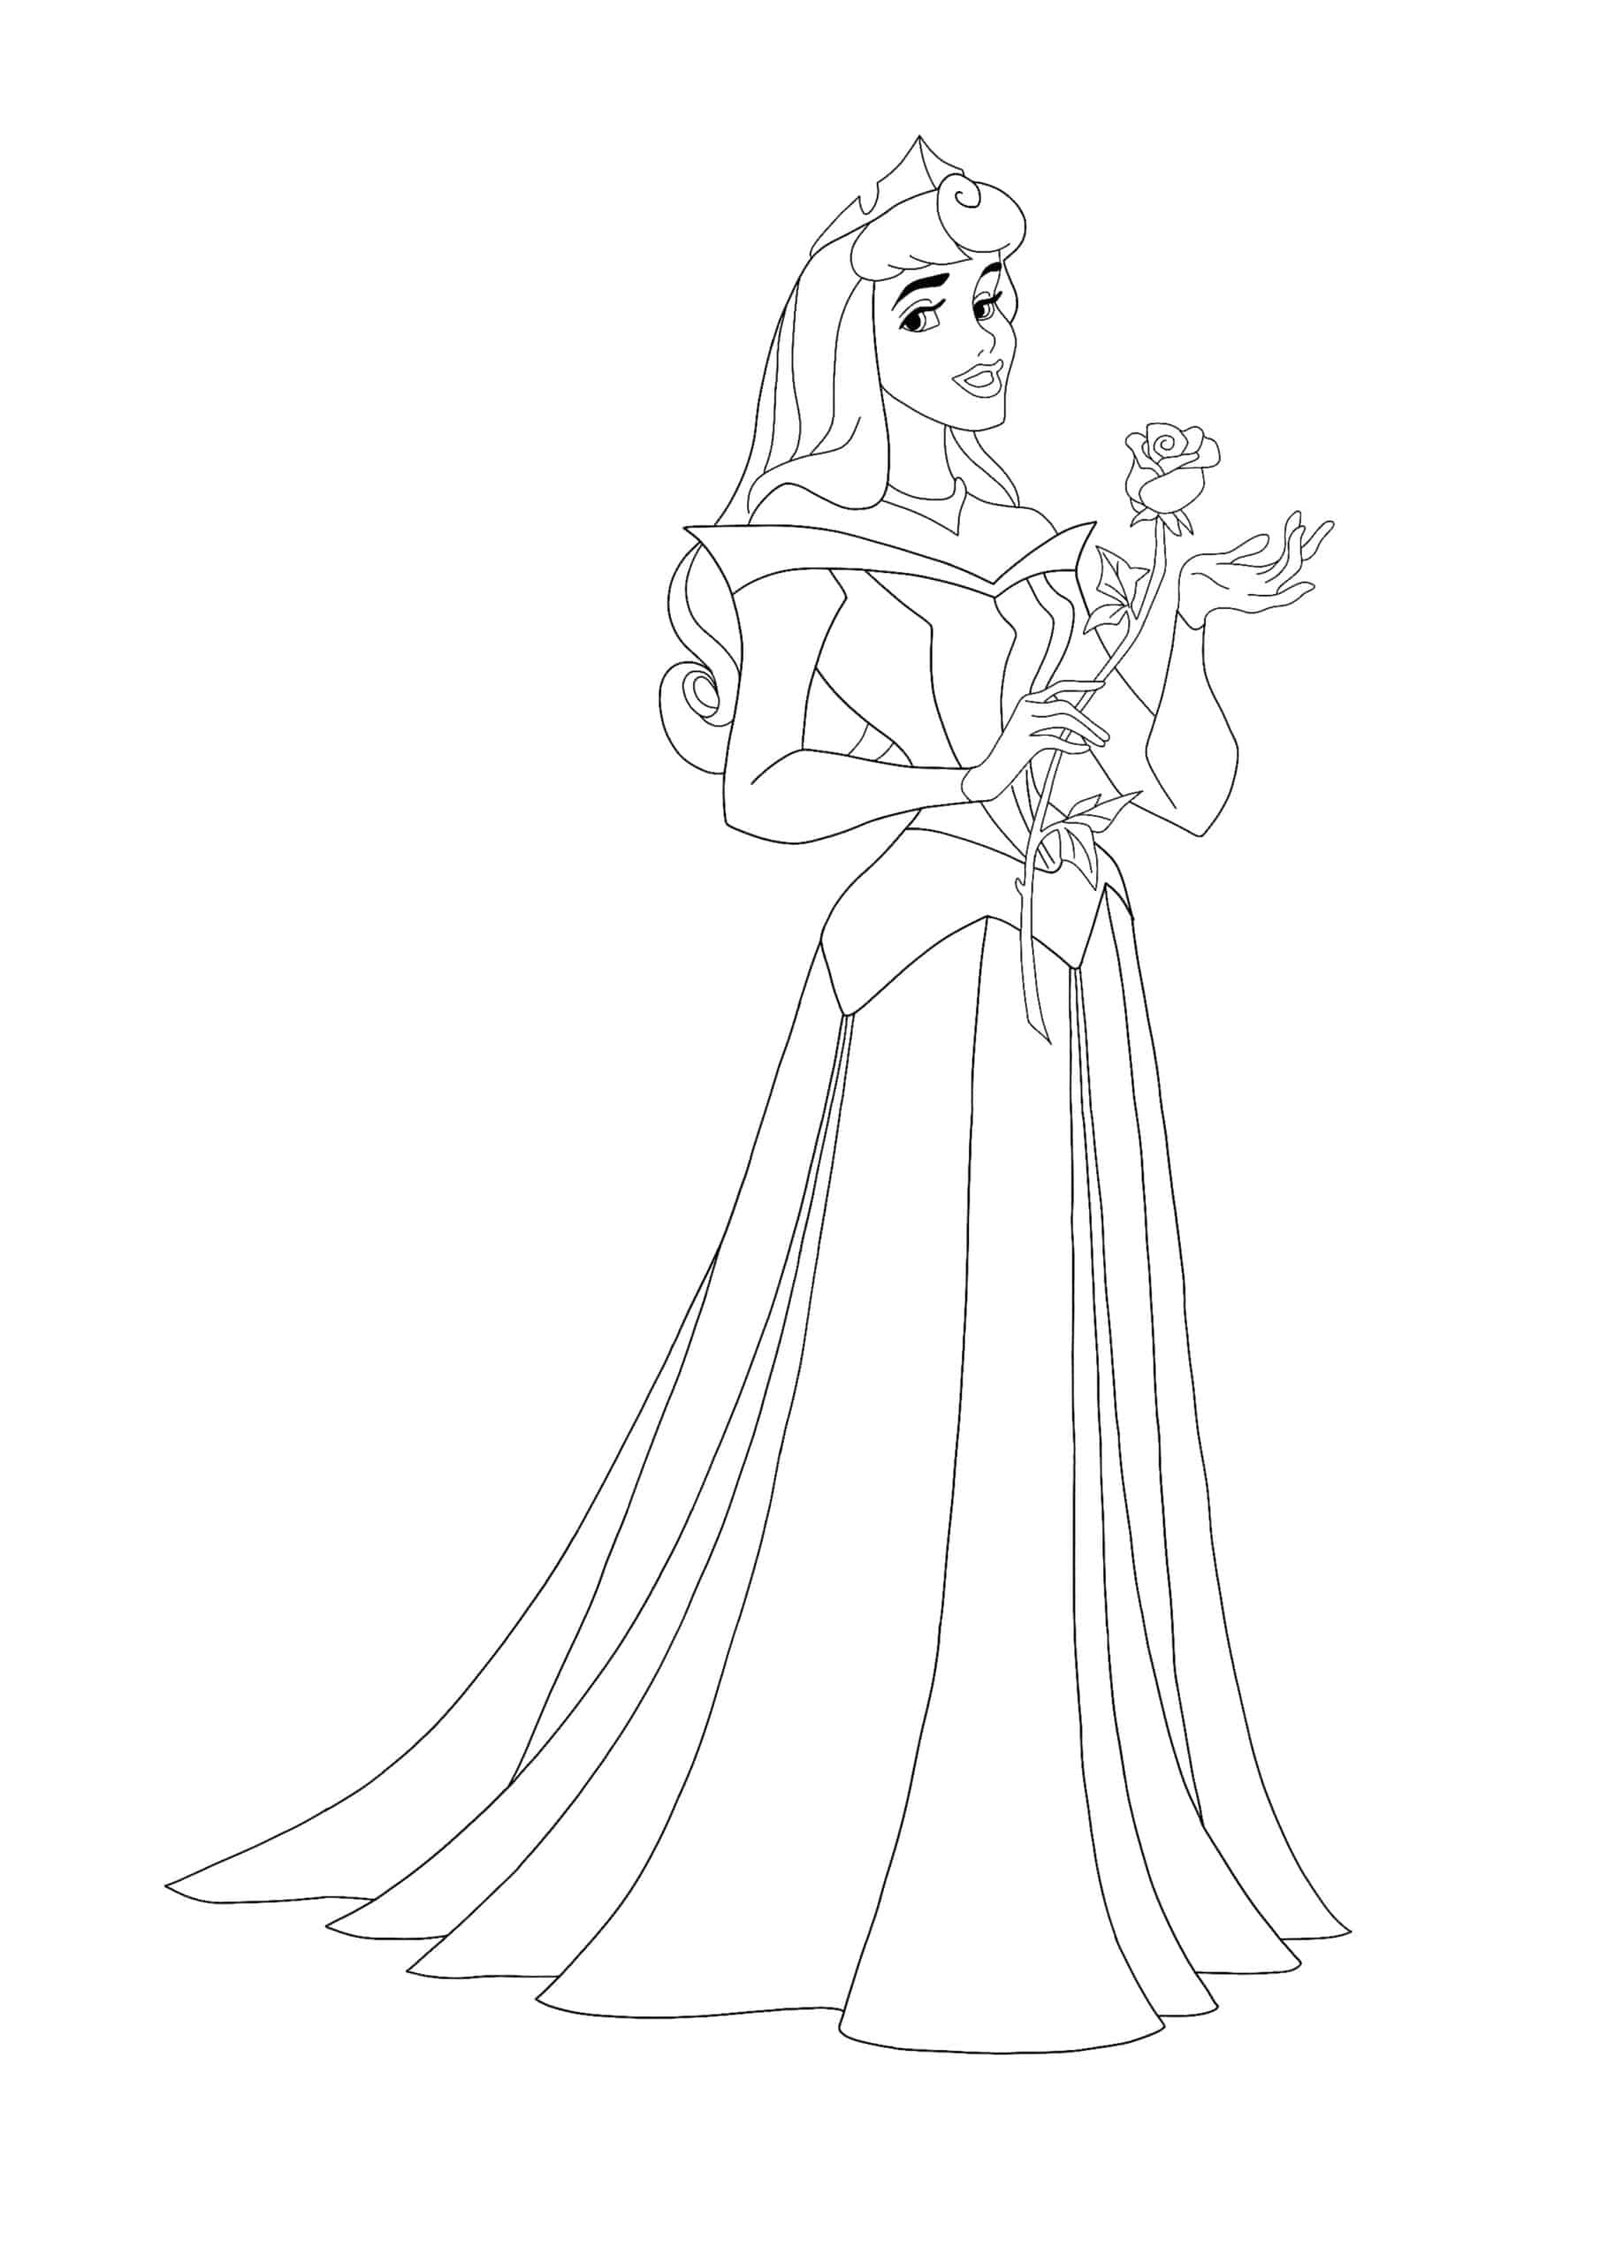 Princess Aurora from Sleeping Beauty coloring page